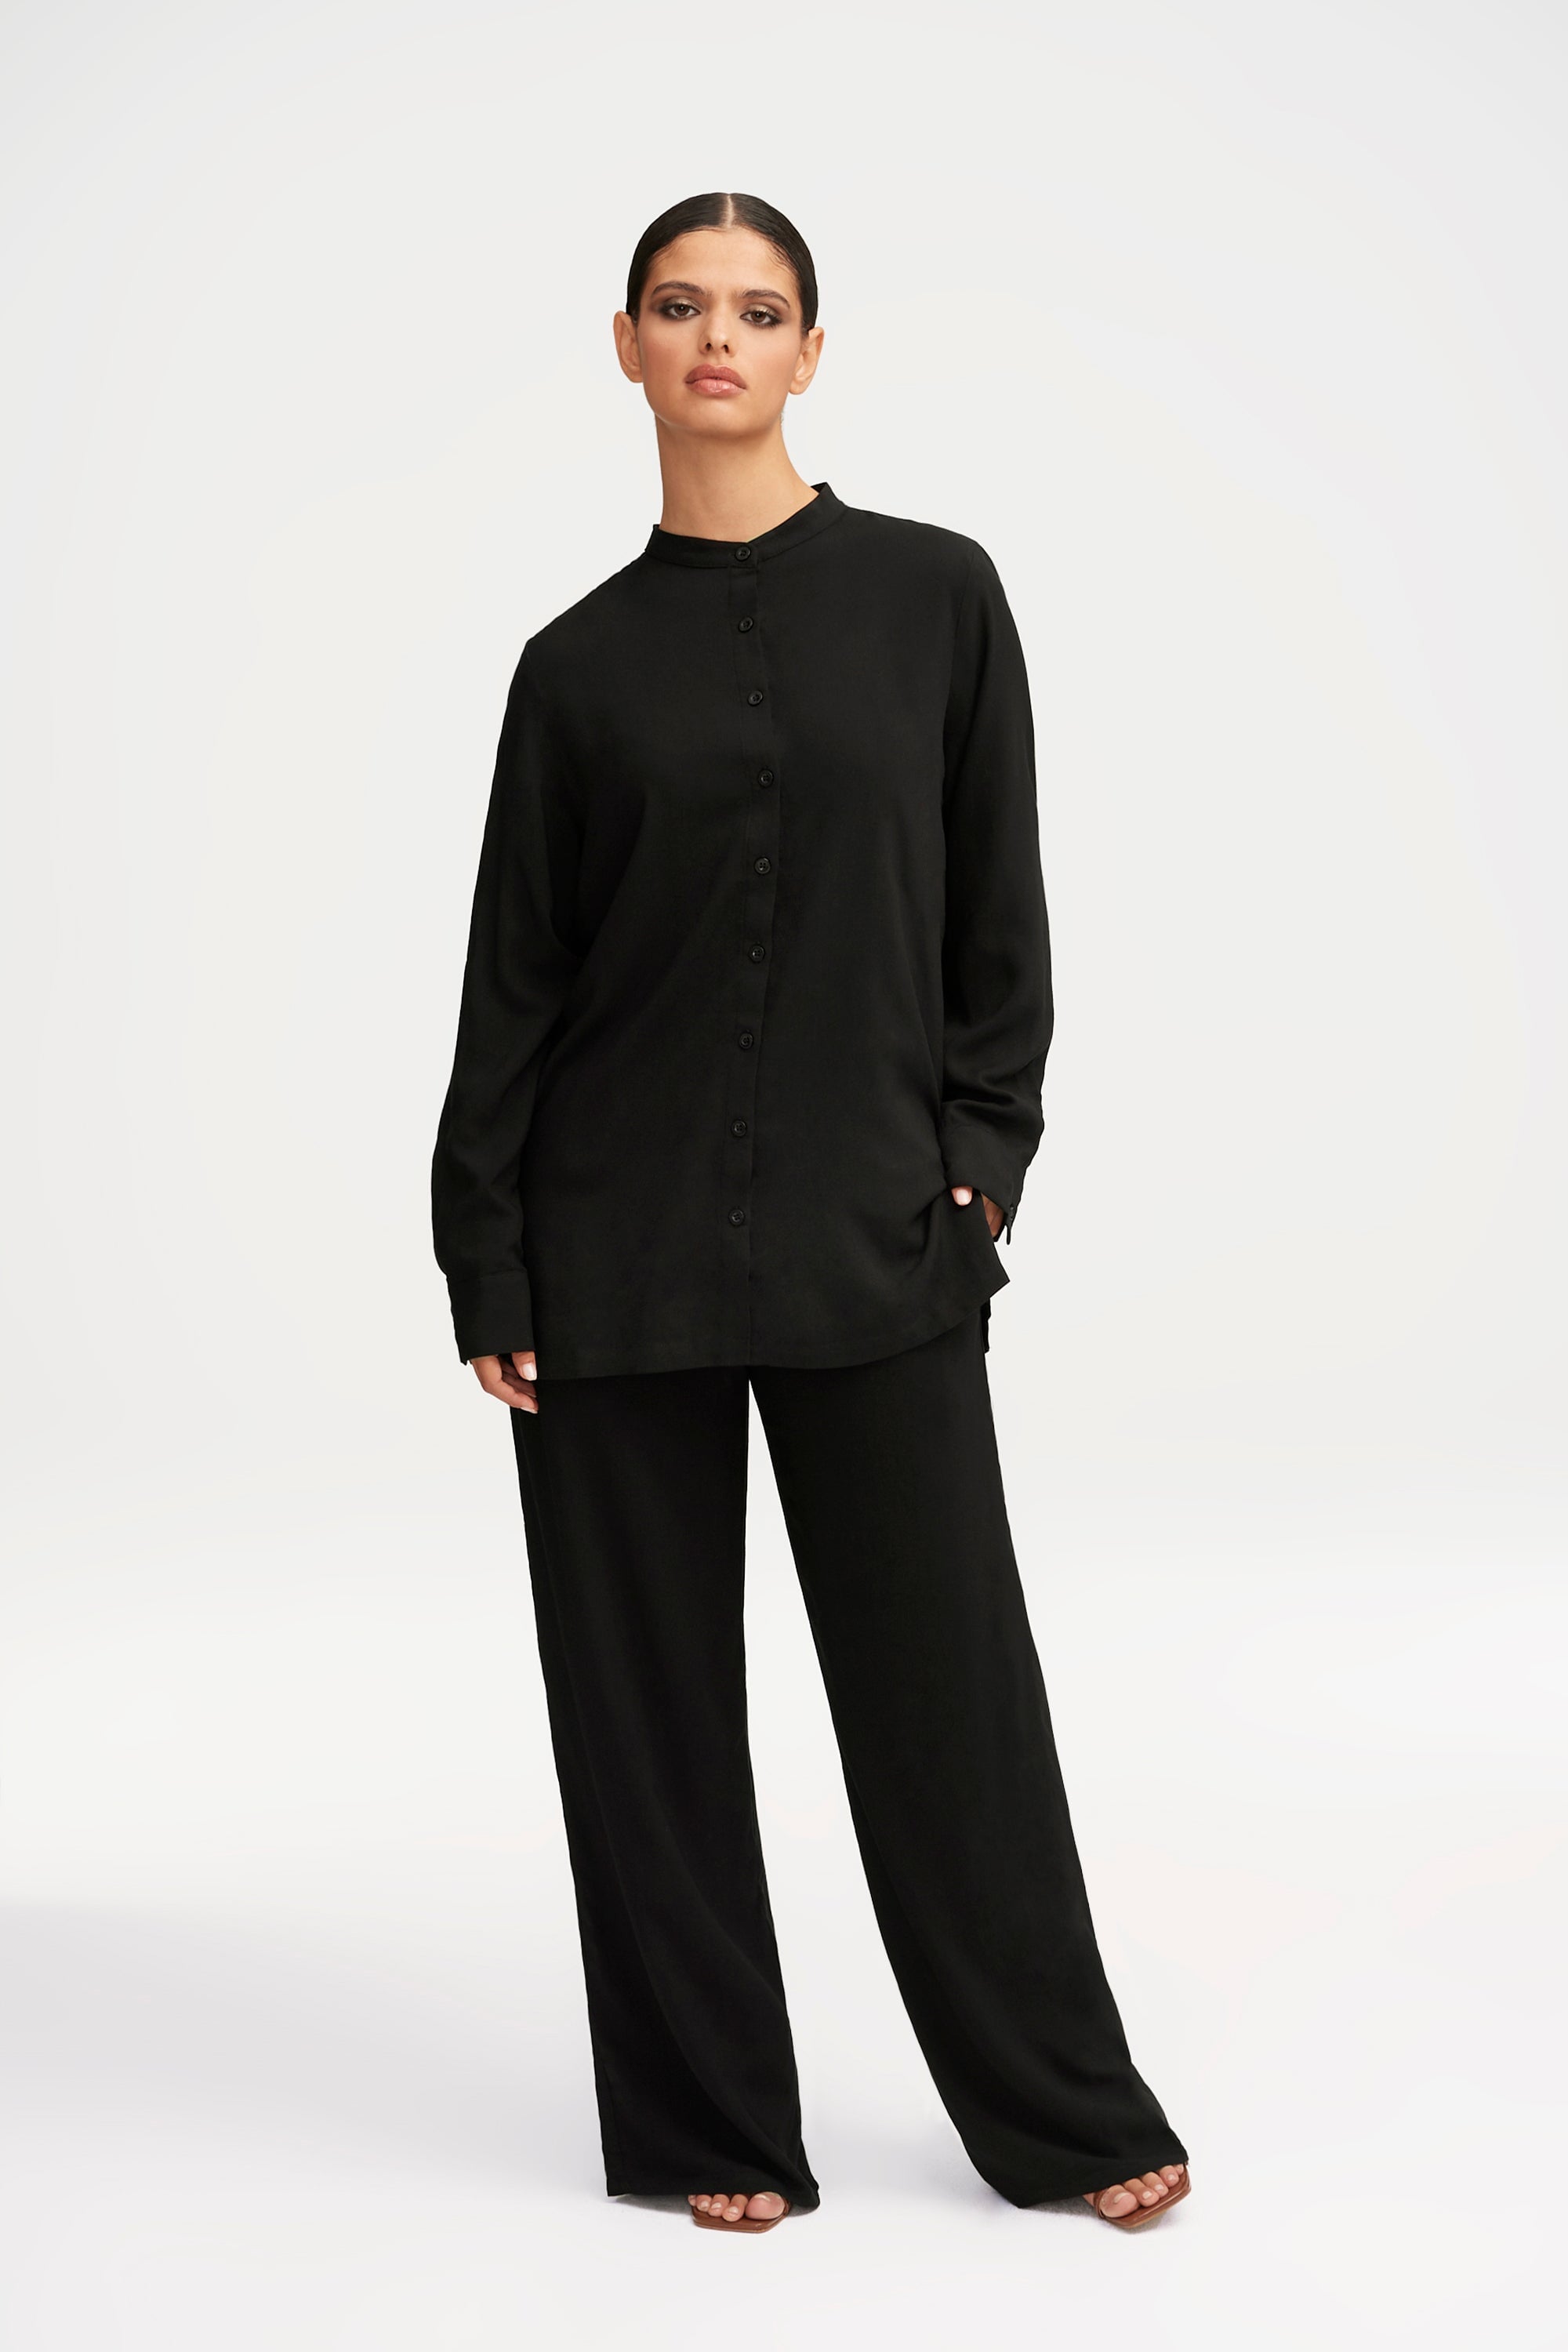 Alina Button Down Side Slit Top - Black Clothing Veiled 